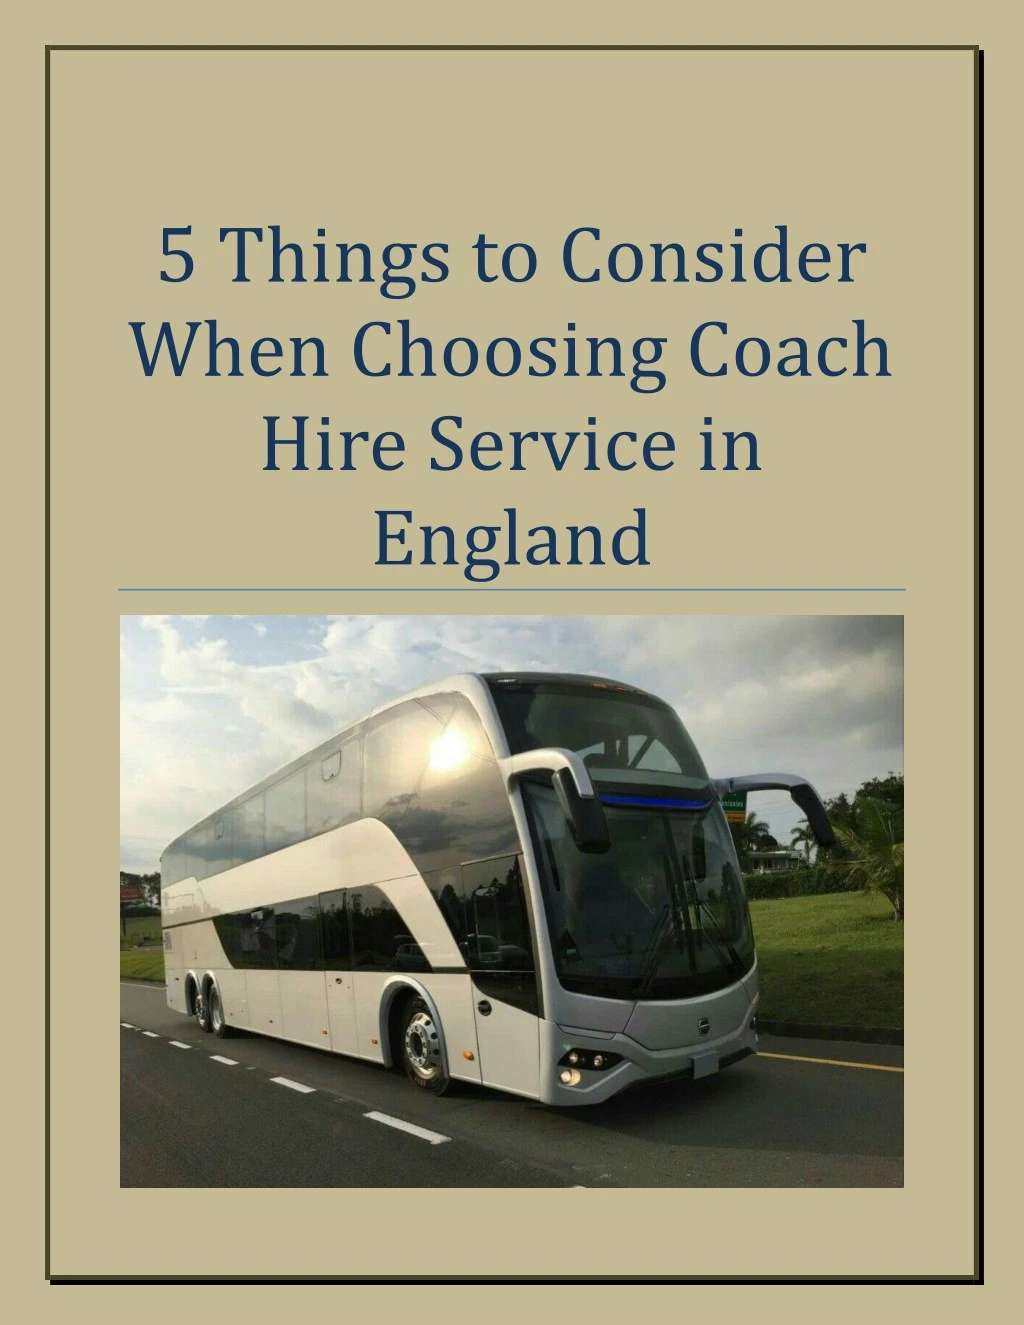 5 things to consider when choosing coach hire